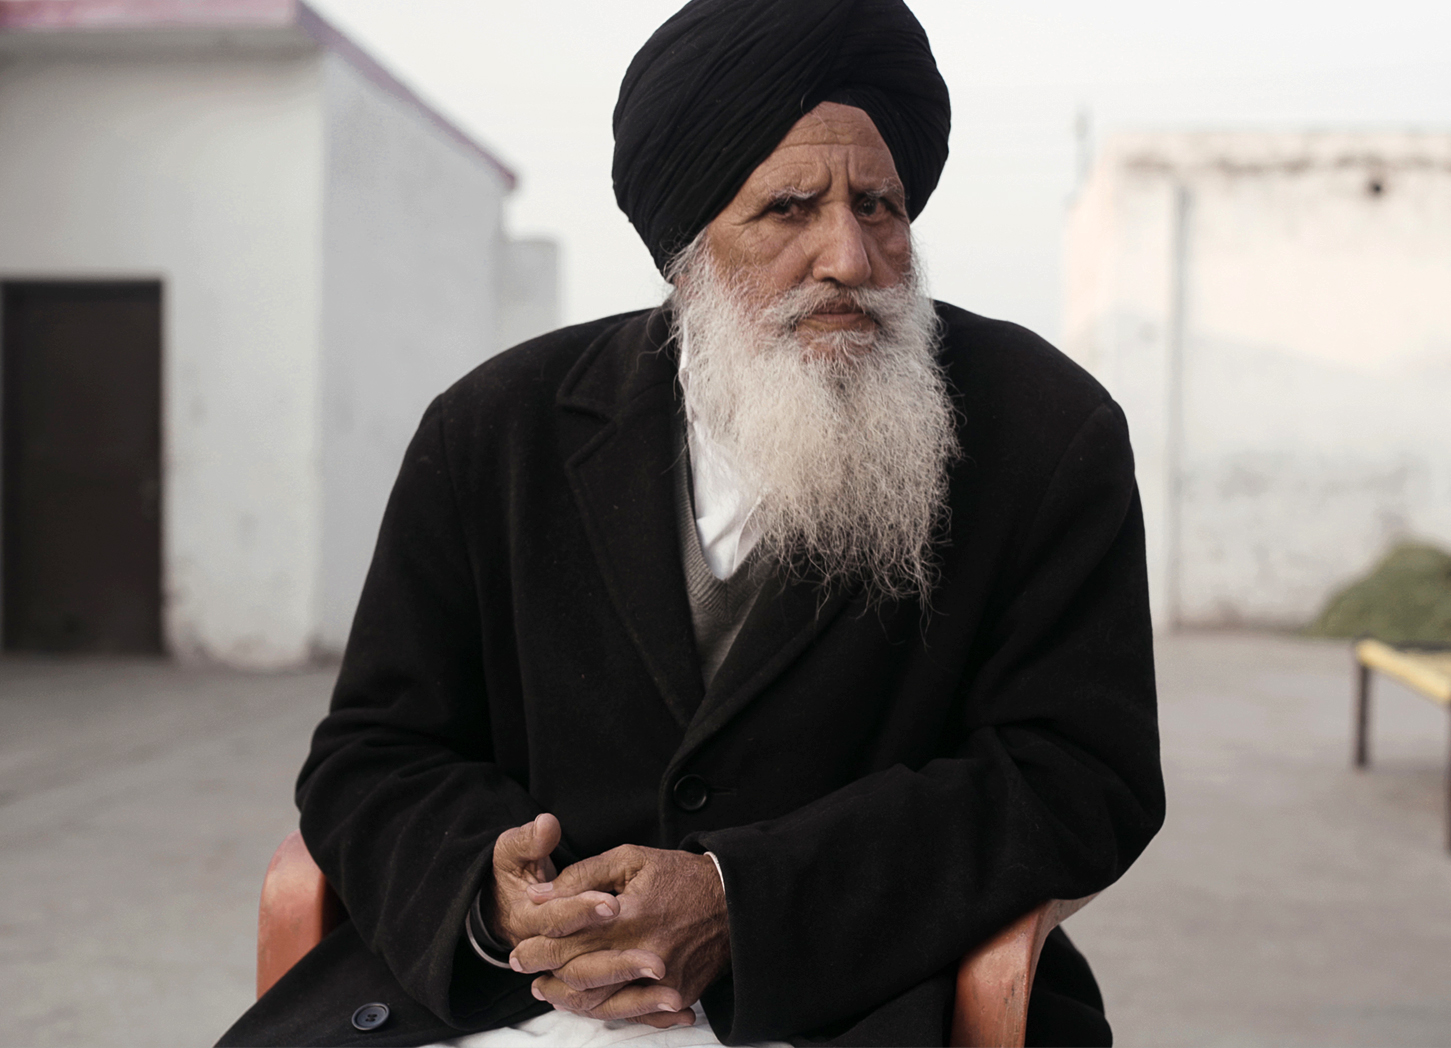 “I have the right to know how my grandson died”: Grandfather of farmer Navreet Singh approaches Delhi High Court